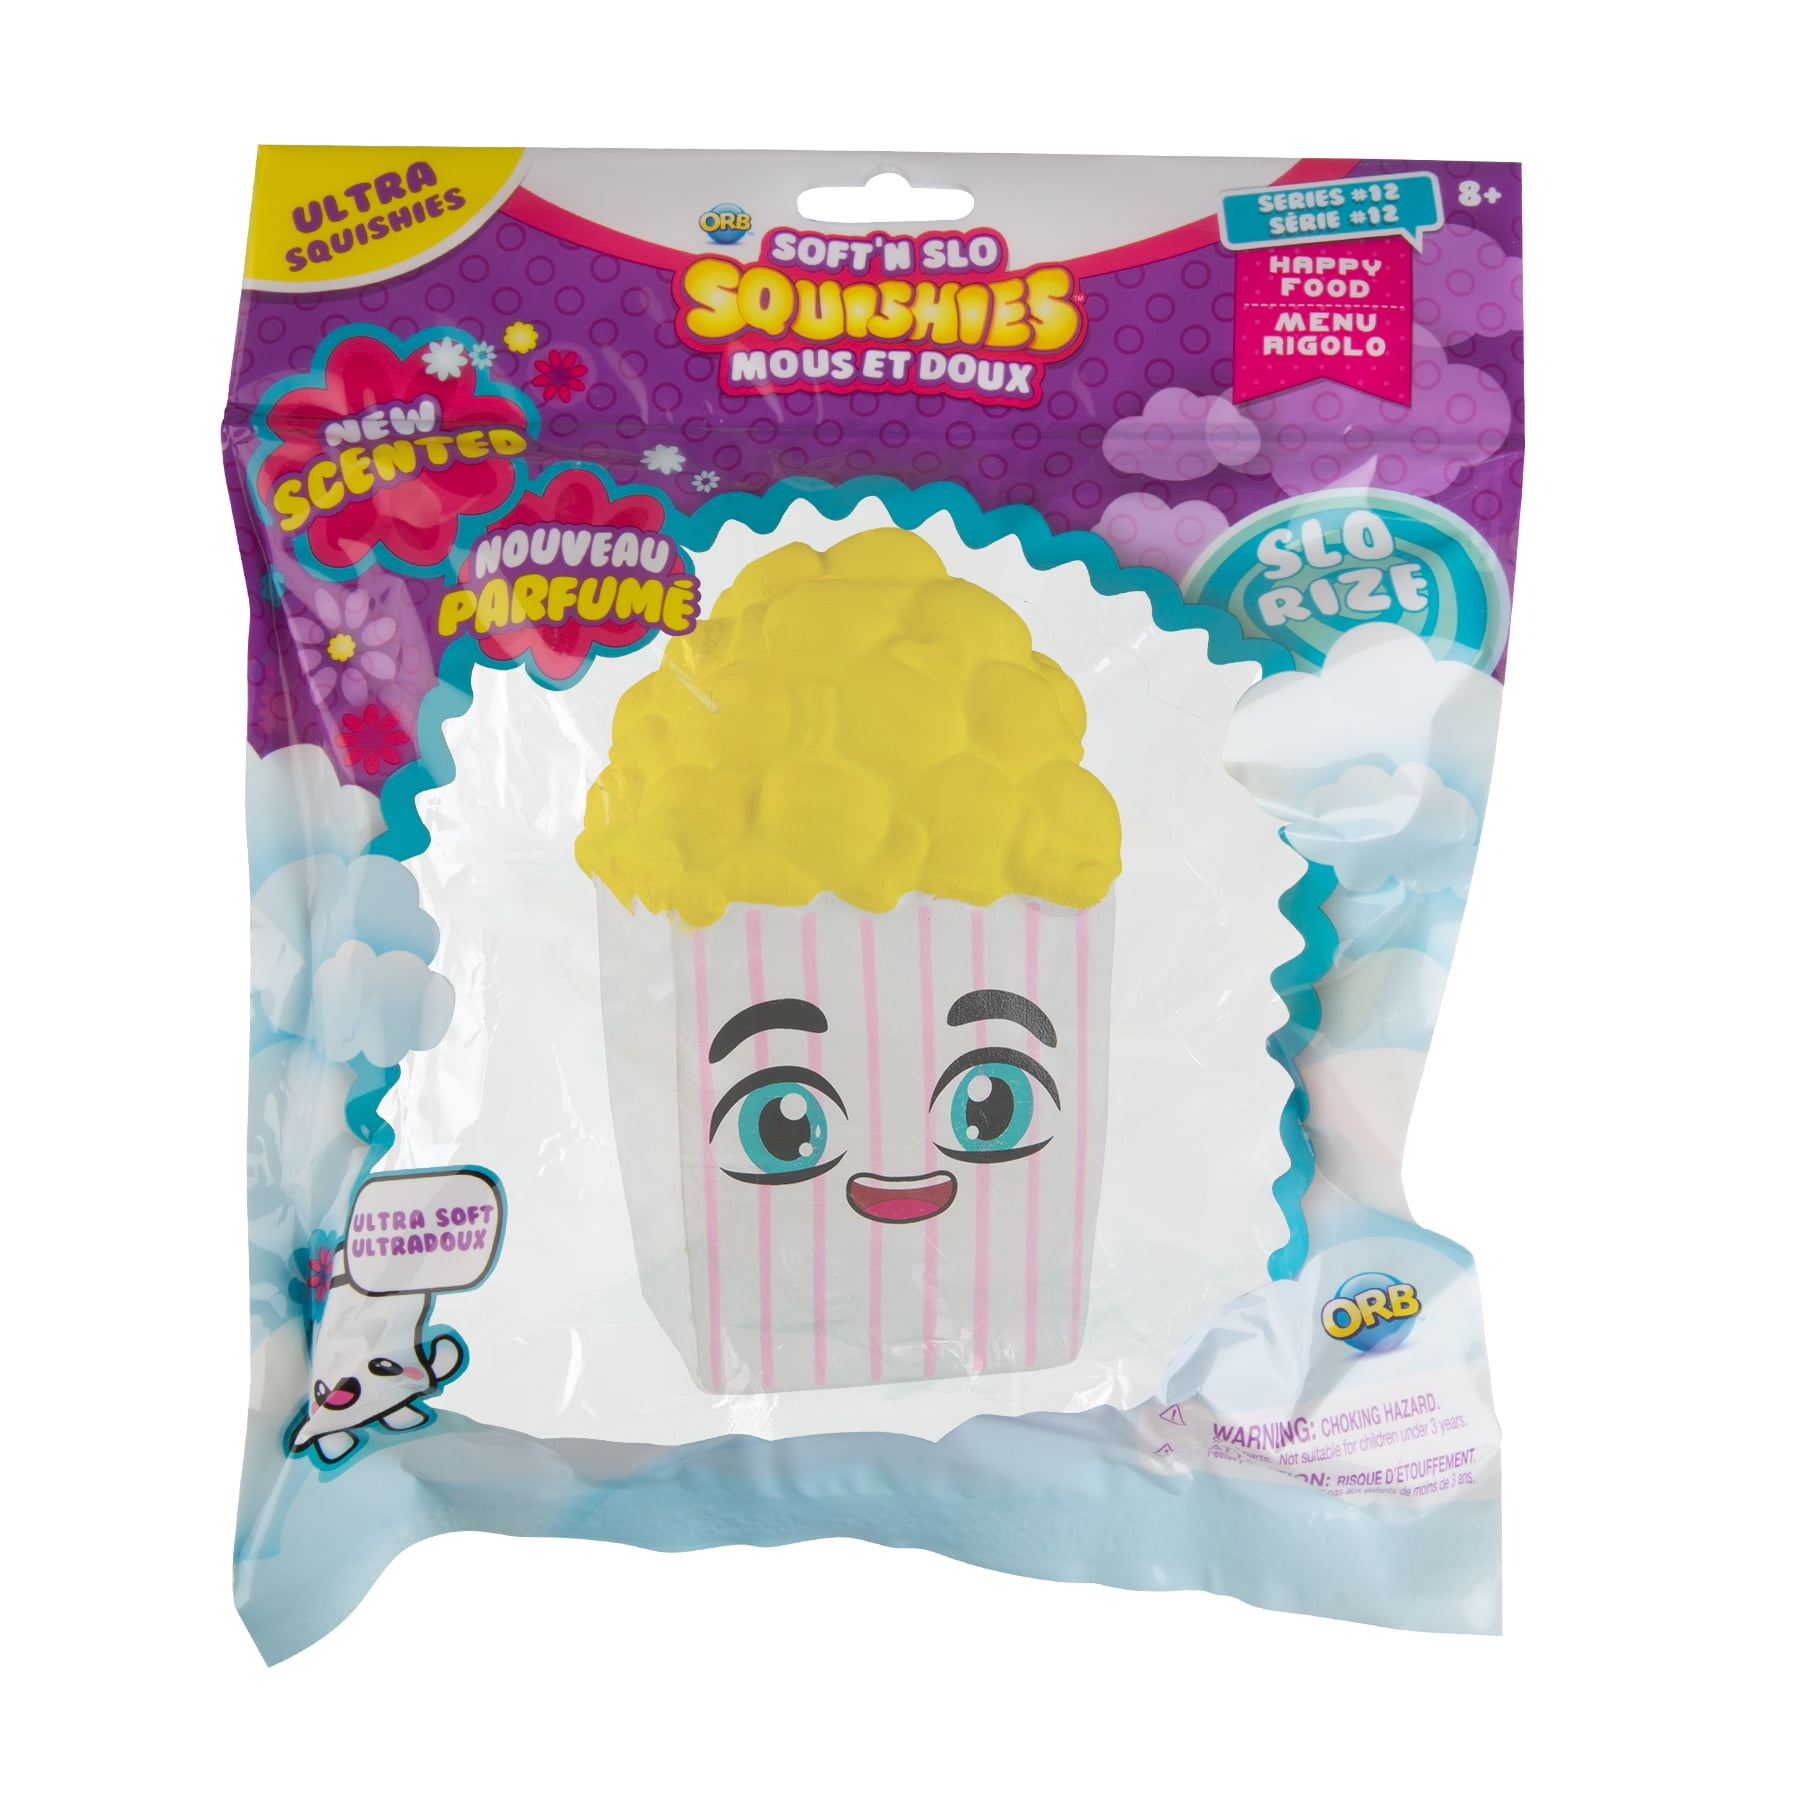 New Soft N Slo Squishies COLLECTORS PACK 12 Limited Edition Soft’N Slow Rise Orb 